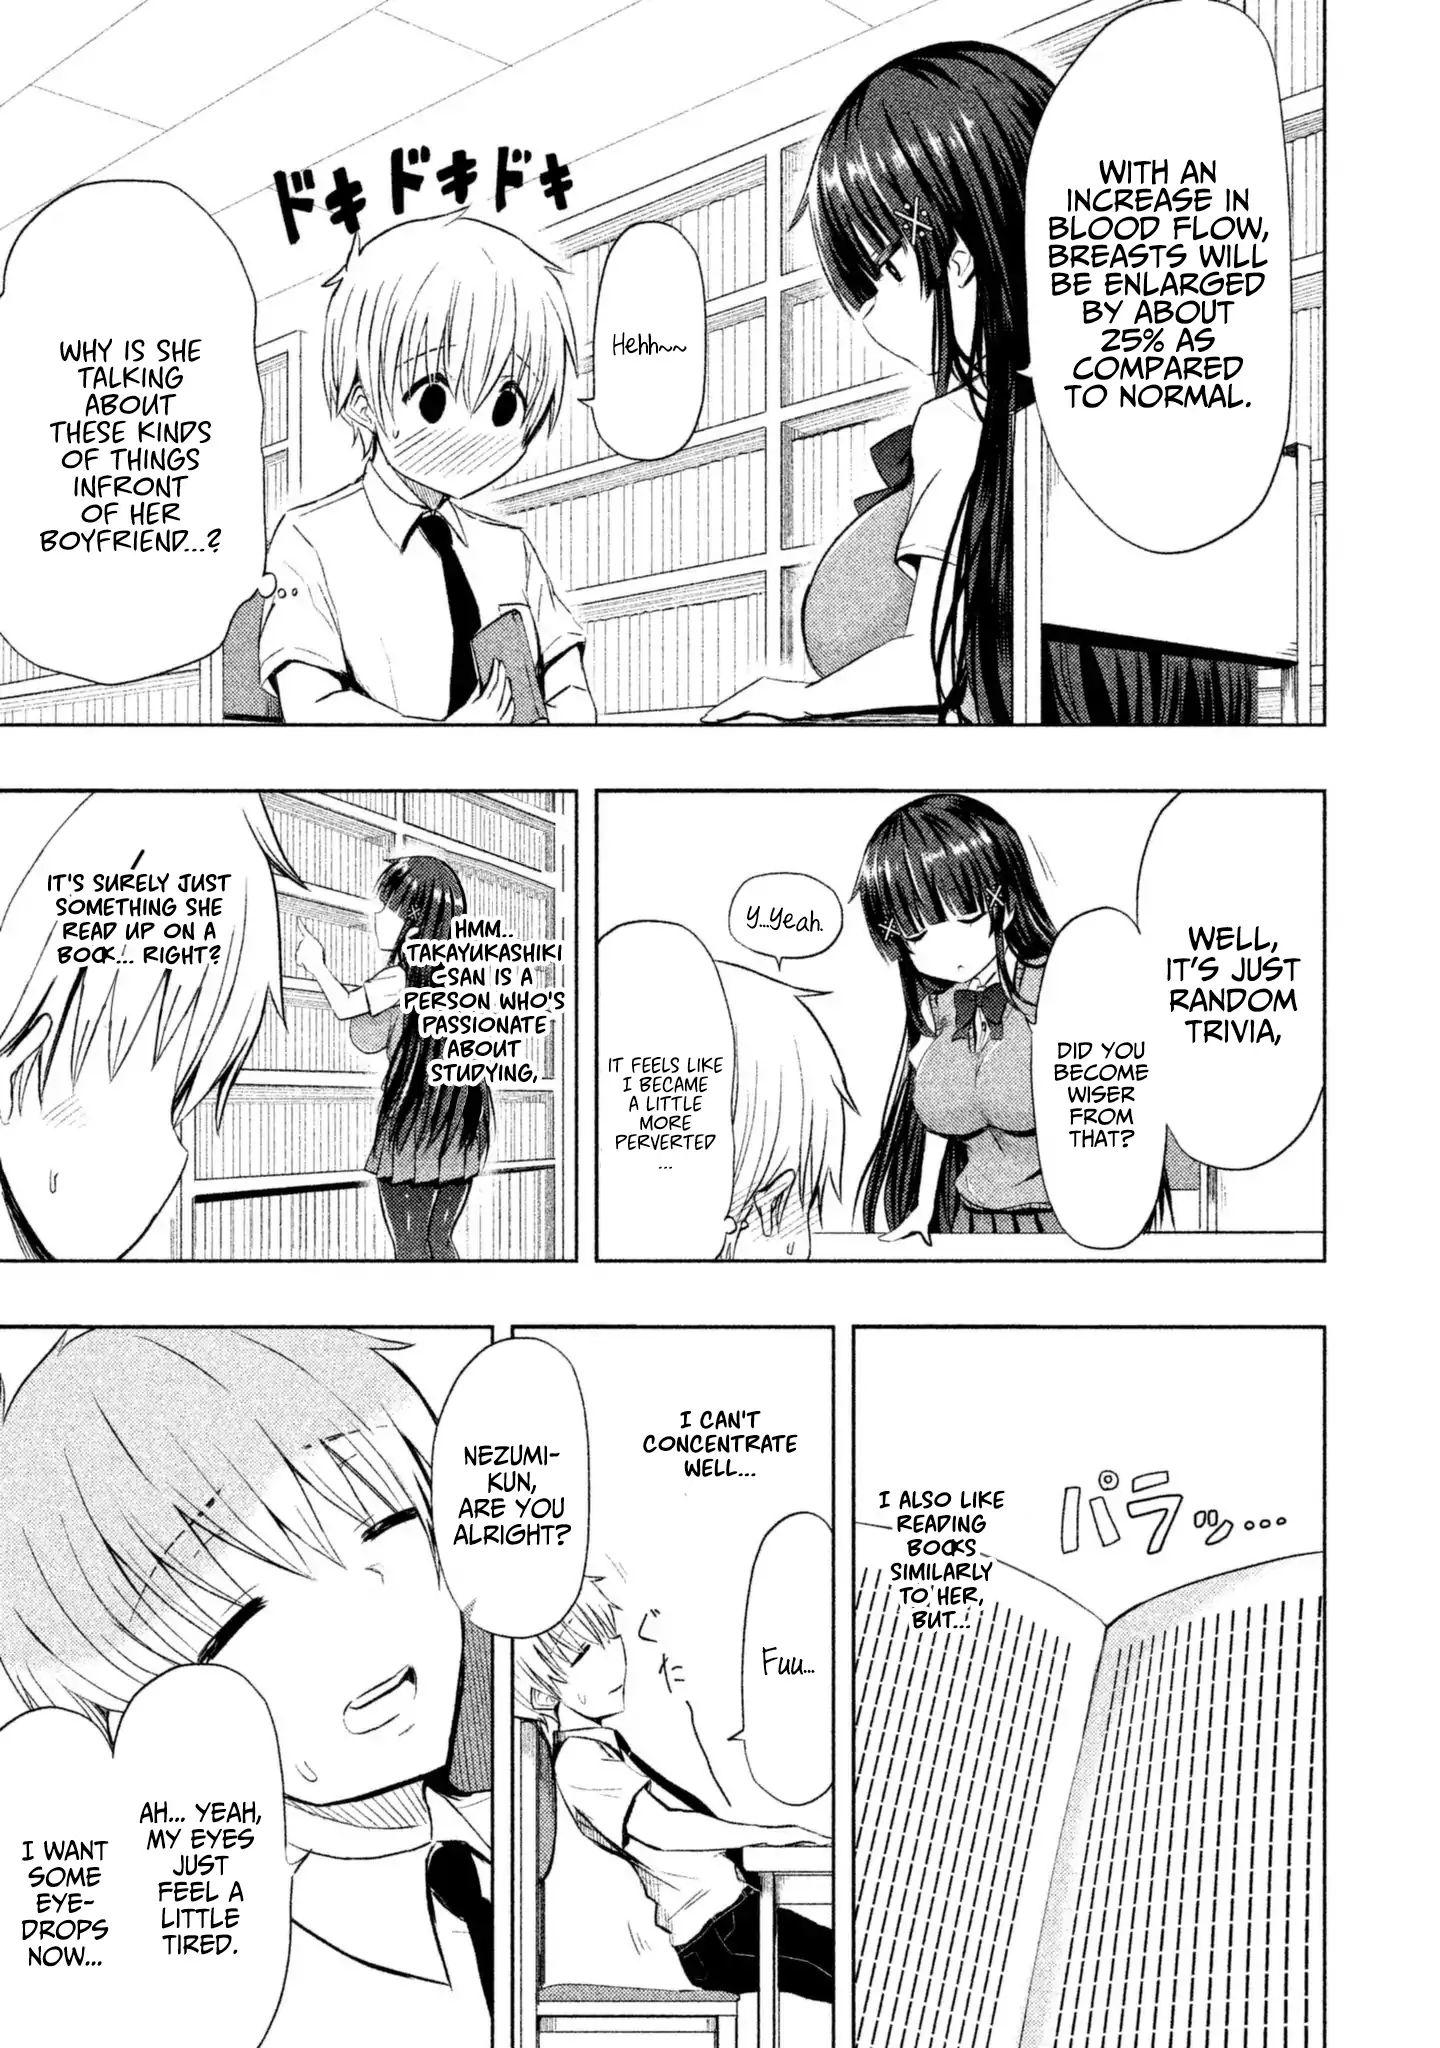 A Girl Who Is Very Well-Informed About Weird Knowledge, Takayukashiki Souko-San Vol.1 Chapter 1: Chest page 8 - Mangakakalots.com